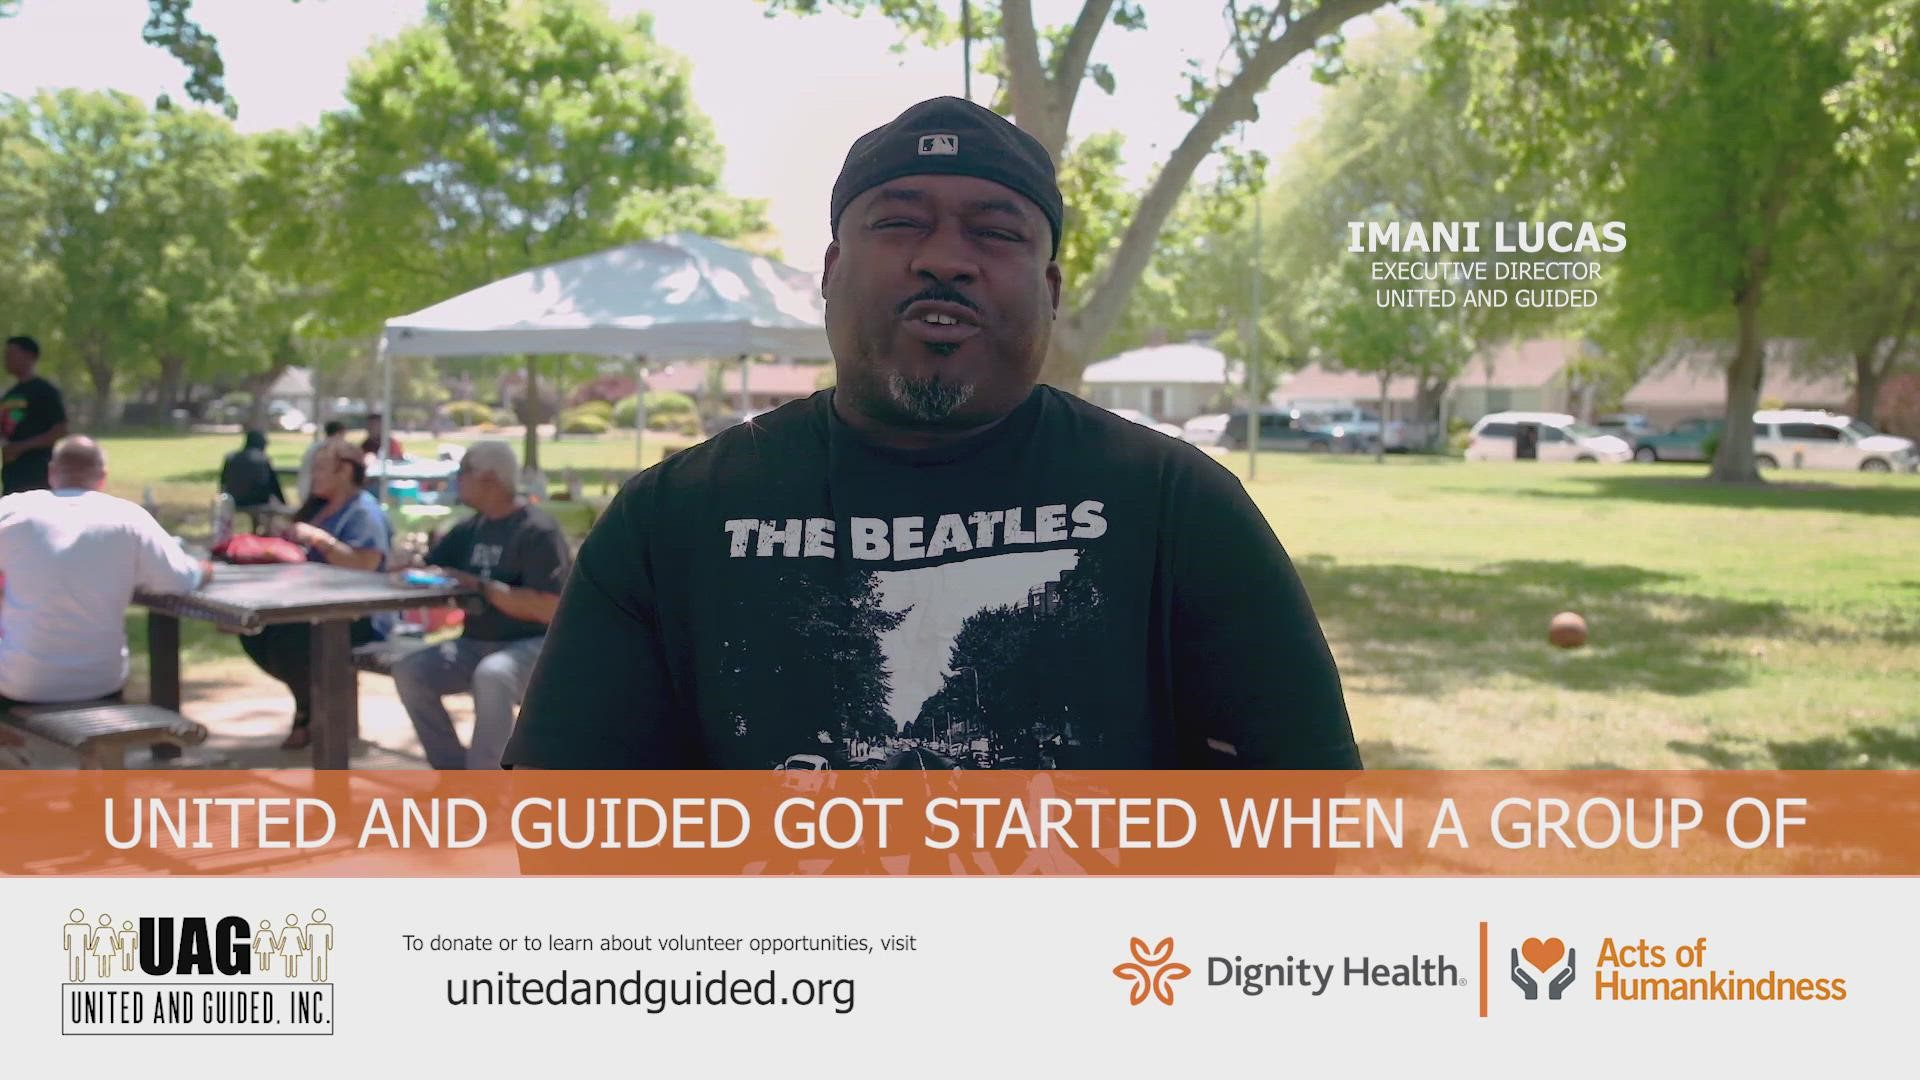 United And Guided was formed in 2017, when a group of parents and youth advocates decided that they wanted to cultivate positive social change...